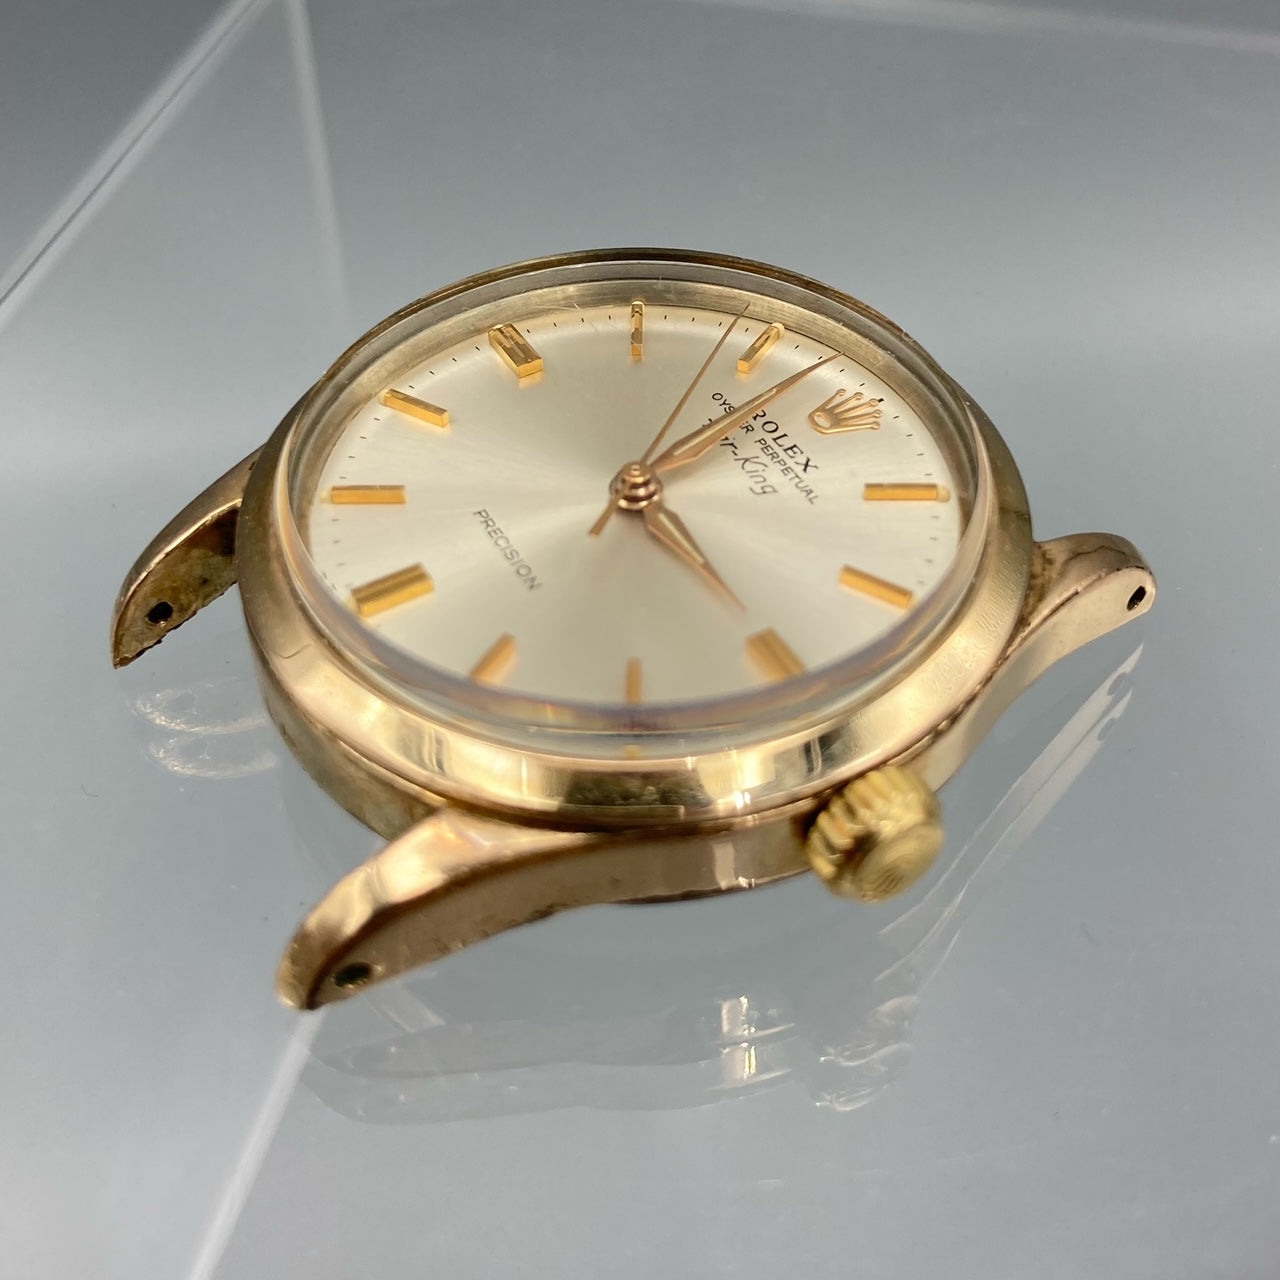 Rolex Air-King Precision Vintage Gold-Capped Watch - 5506